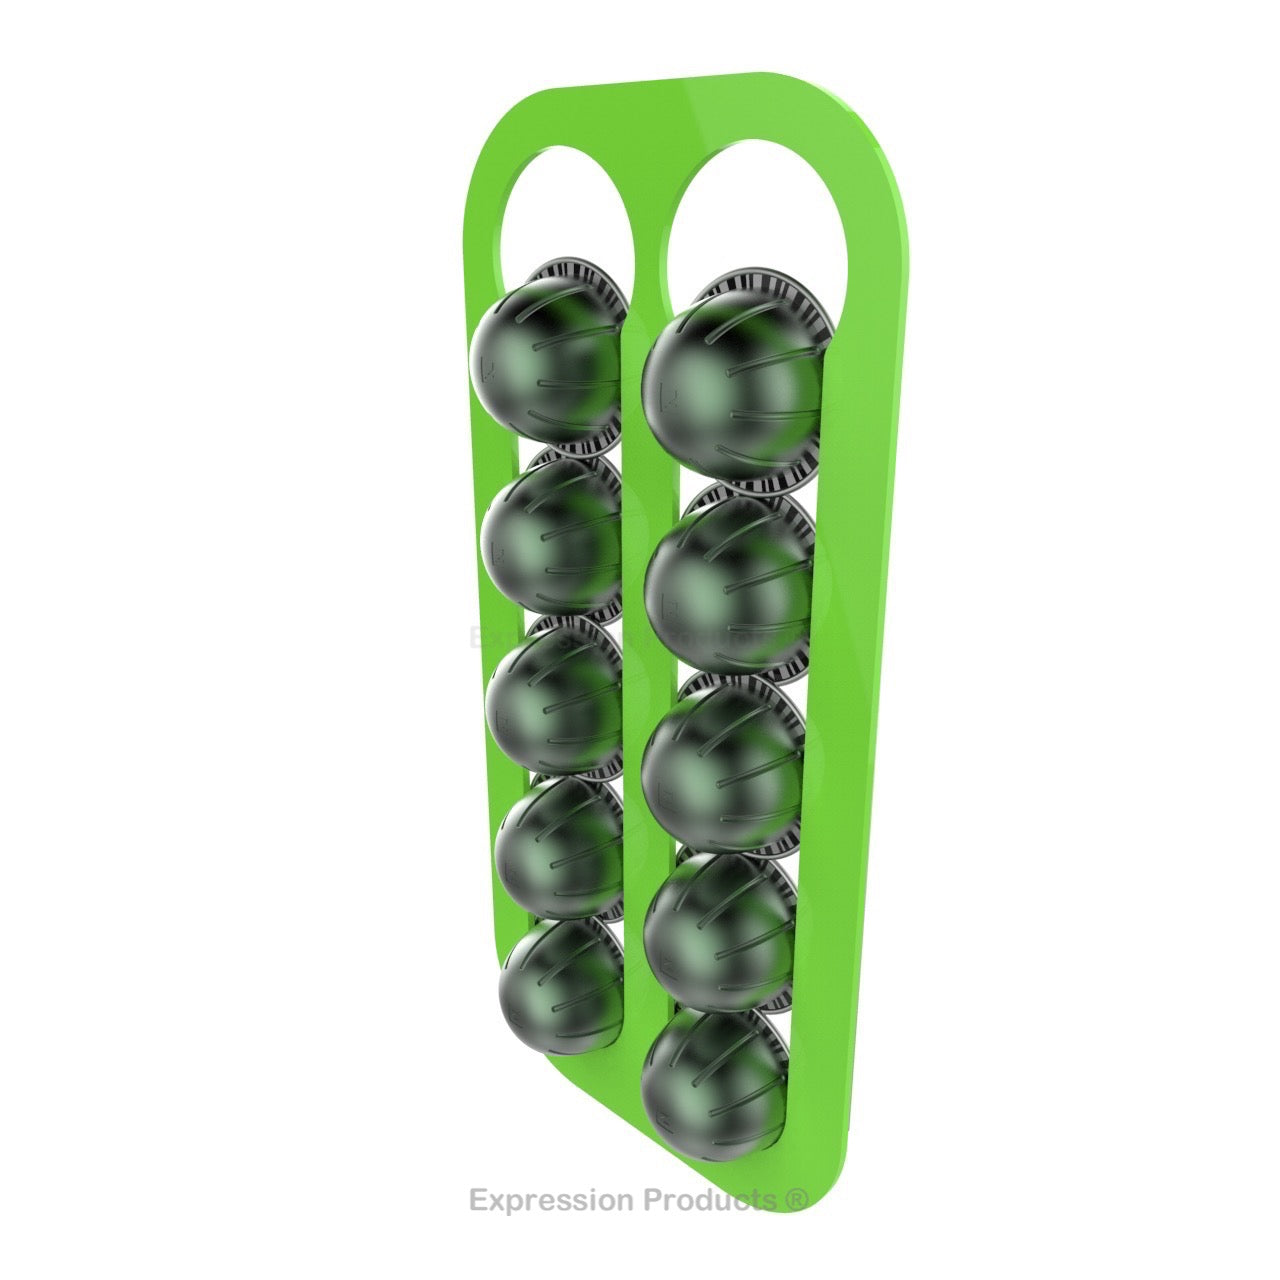 Magnetic Nespresso Vertuo capsule holder shown in lime holding 10 pods